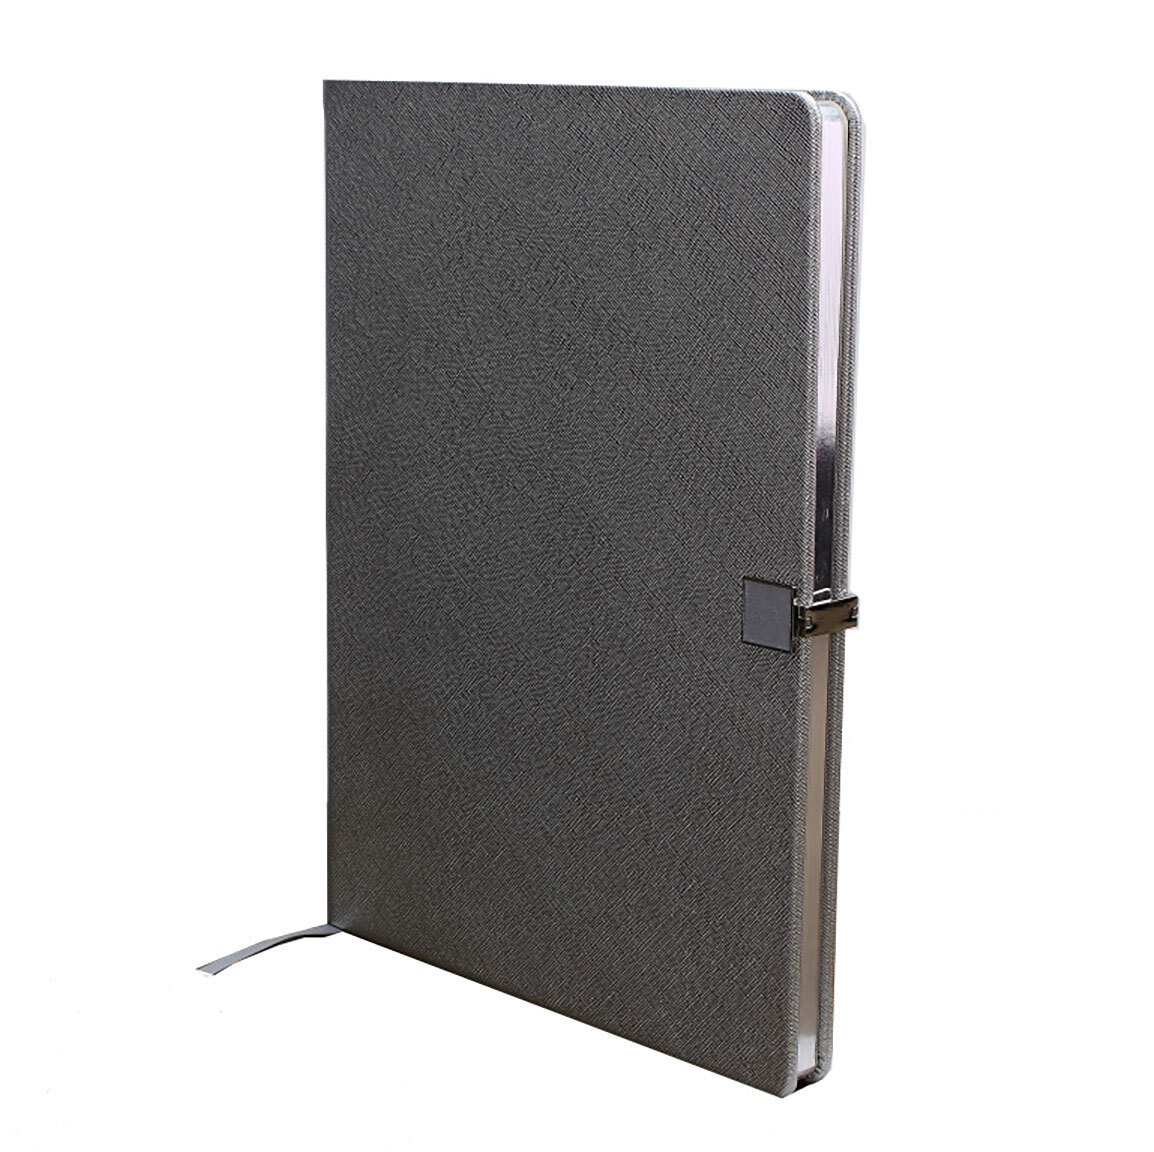 Addison Ross Notebook A4 Silver & Silver Pu Leather NB1103